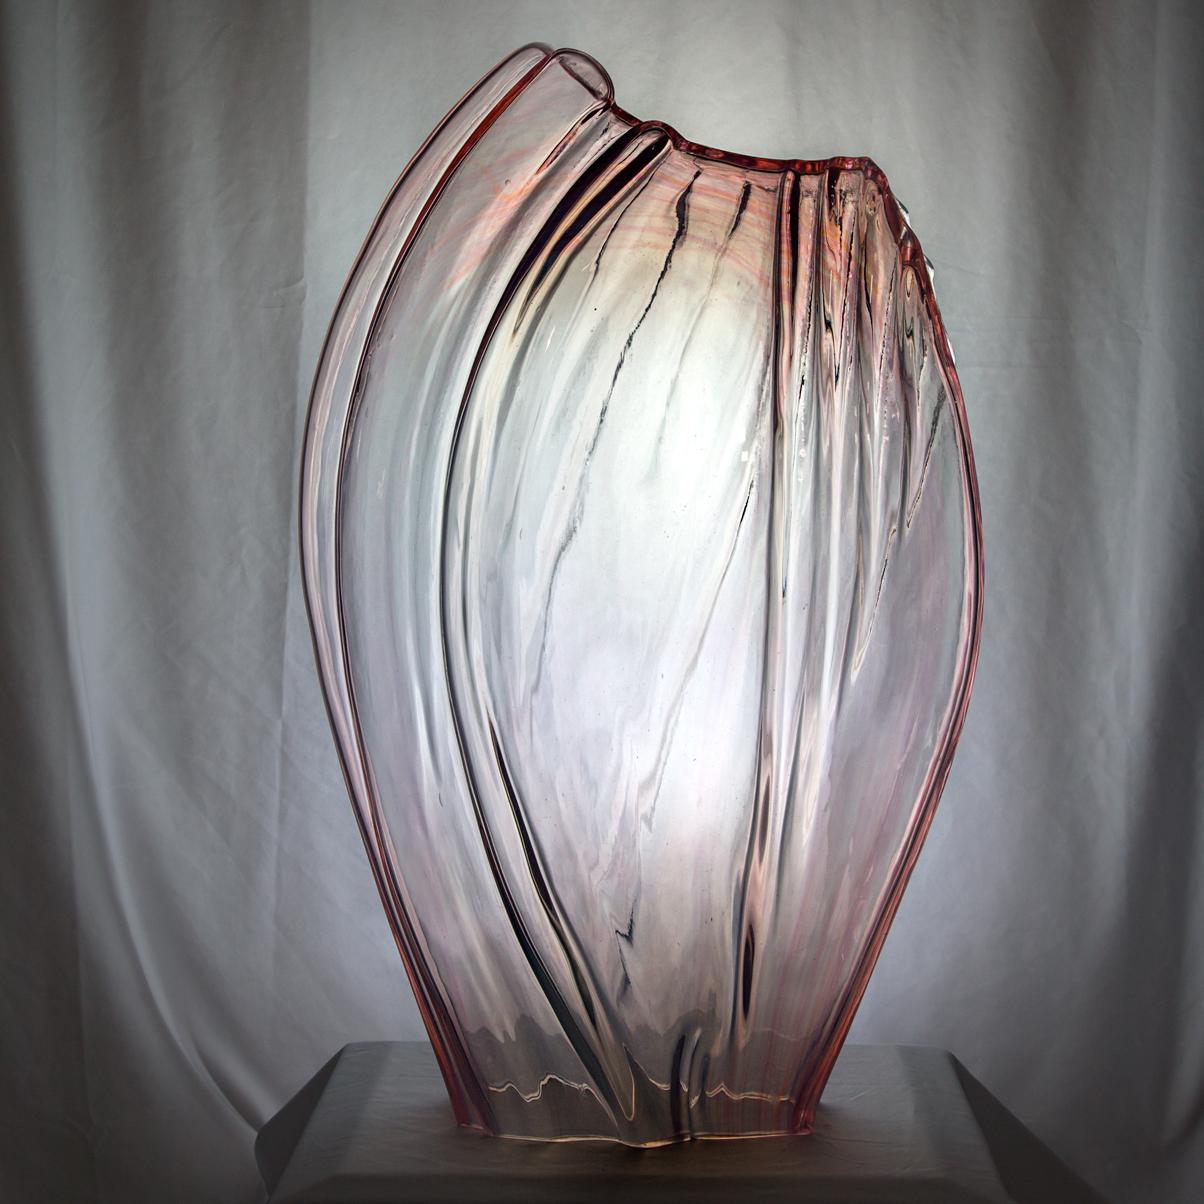 Standing Stone.  Contemporary blown glass art - Sculpture by William Morris